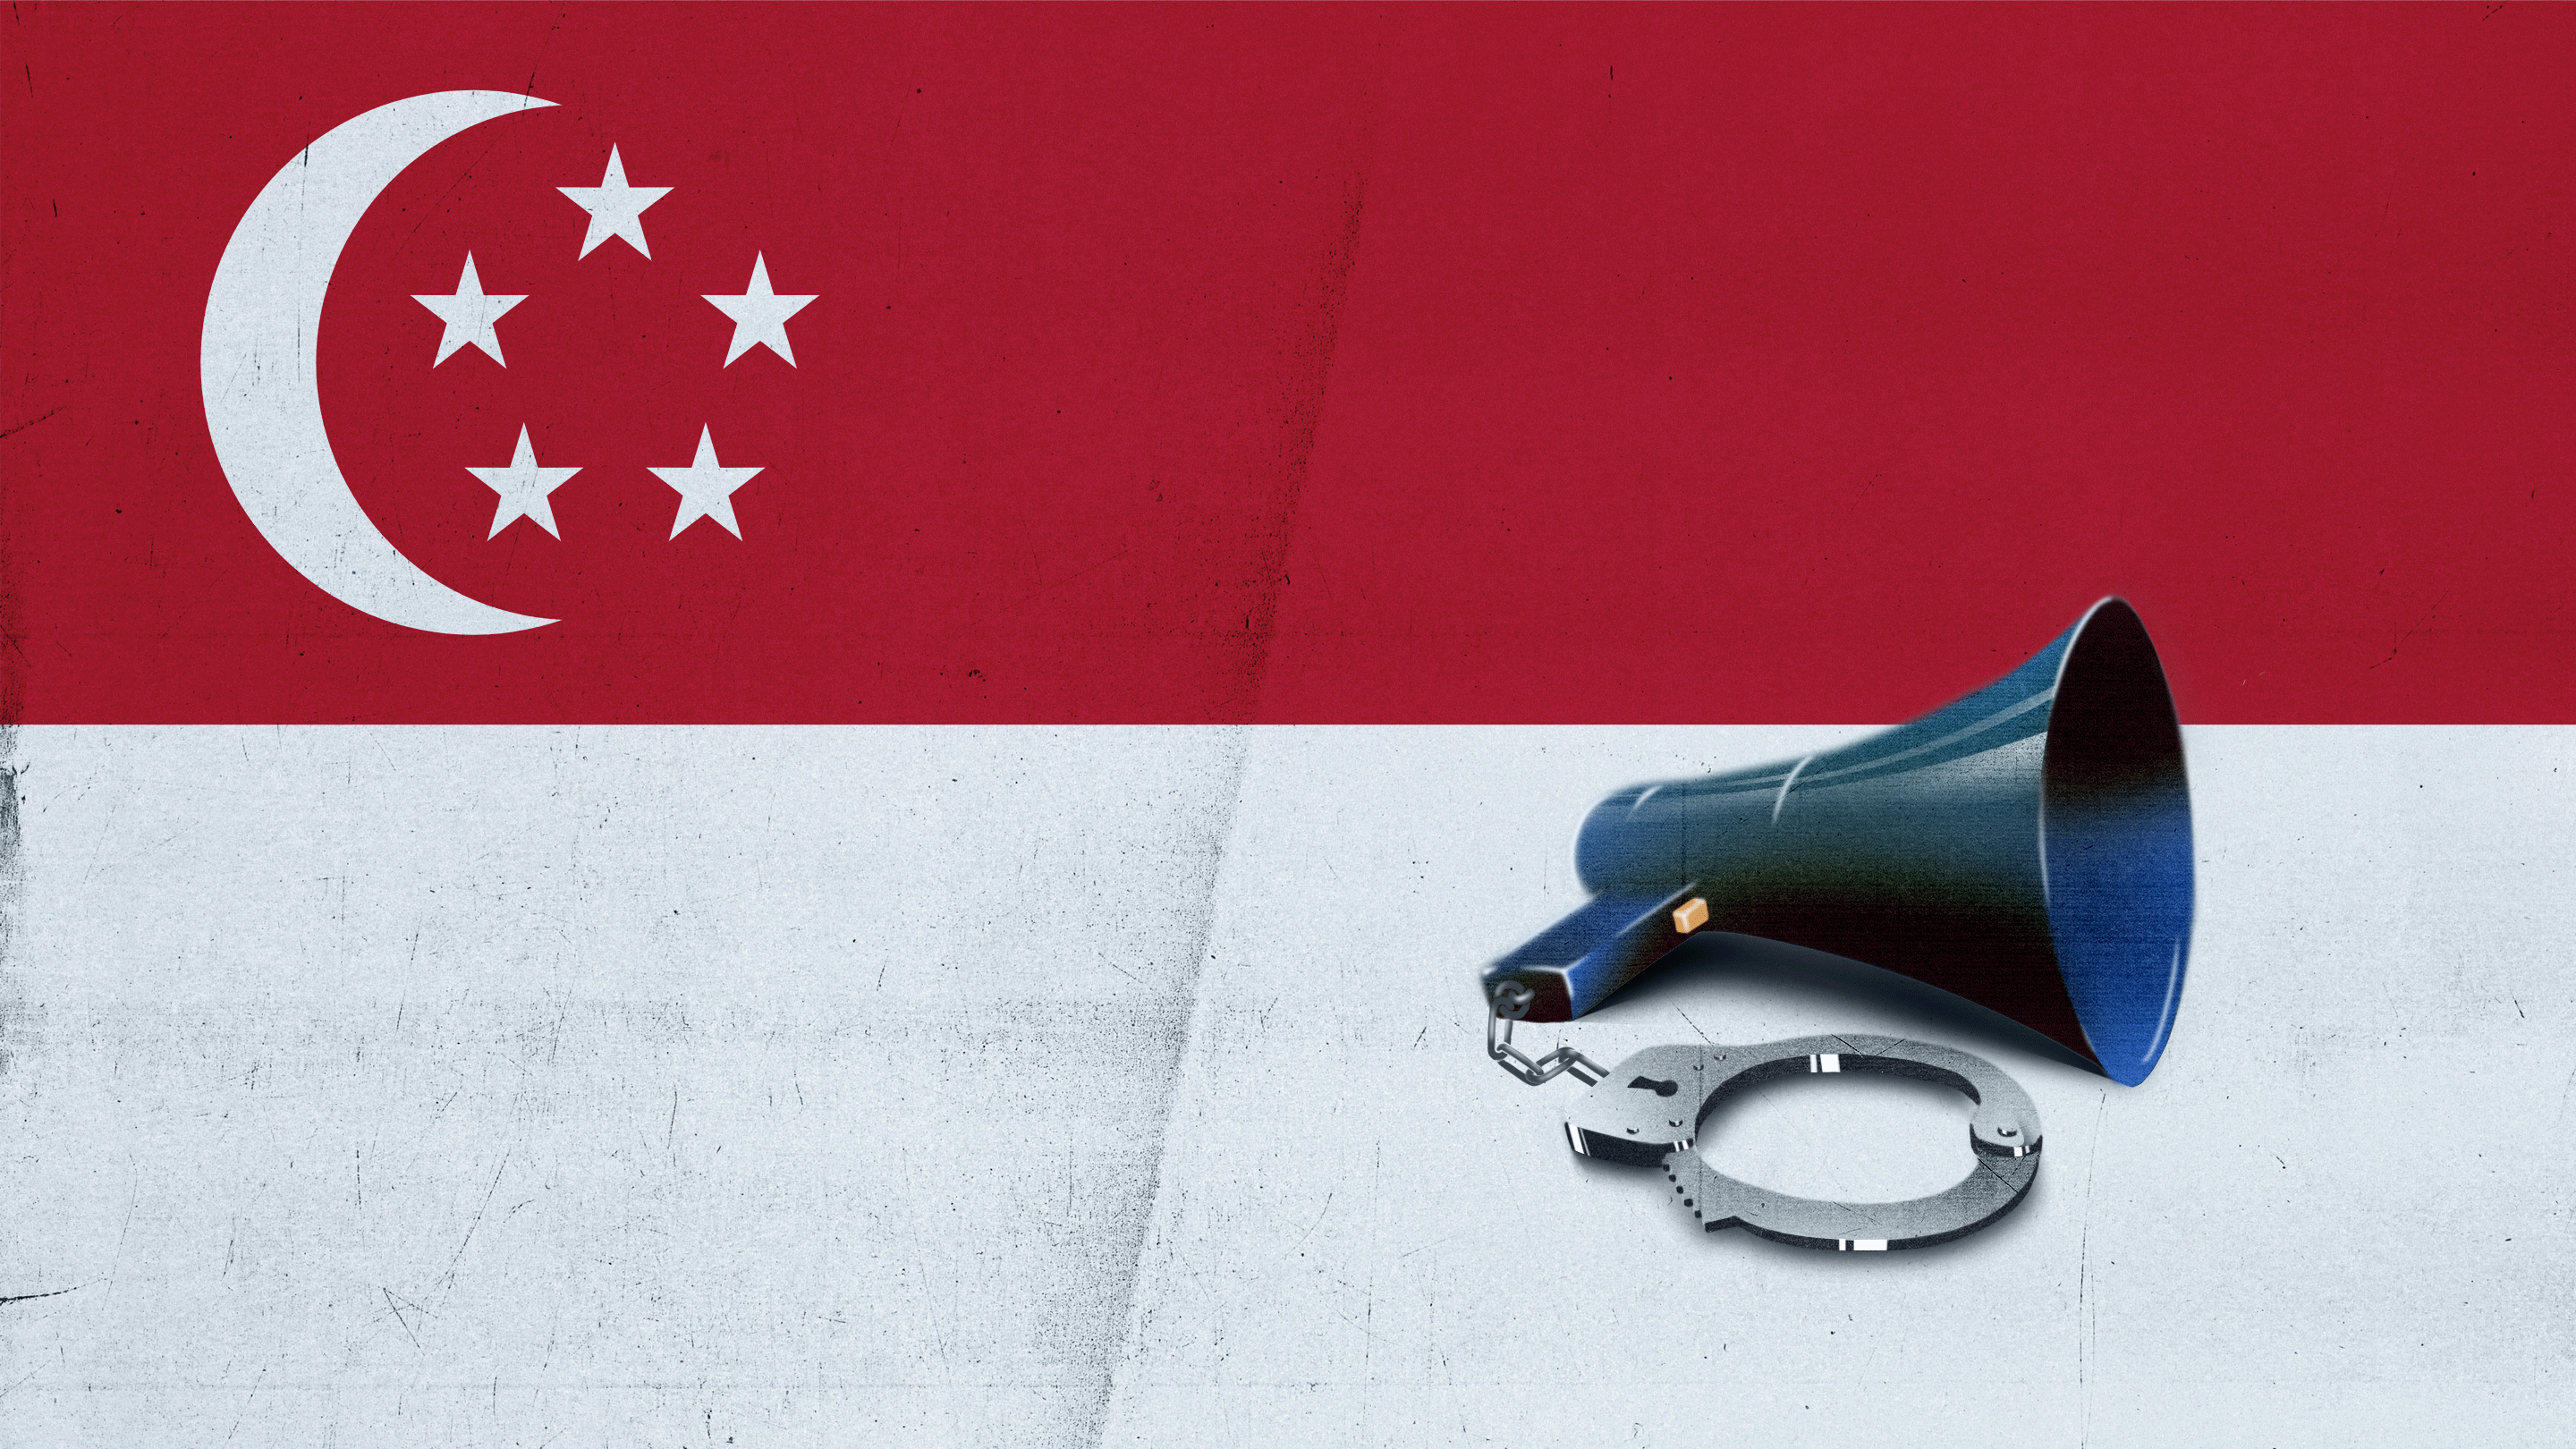 Metallic handcuff attached on a dark blue megaphone sitting on top of Singapore’s flag